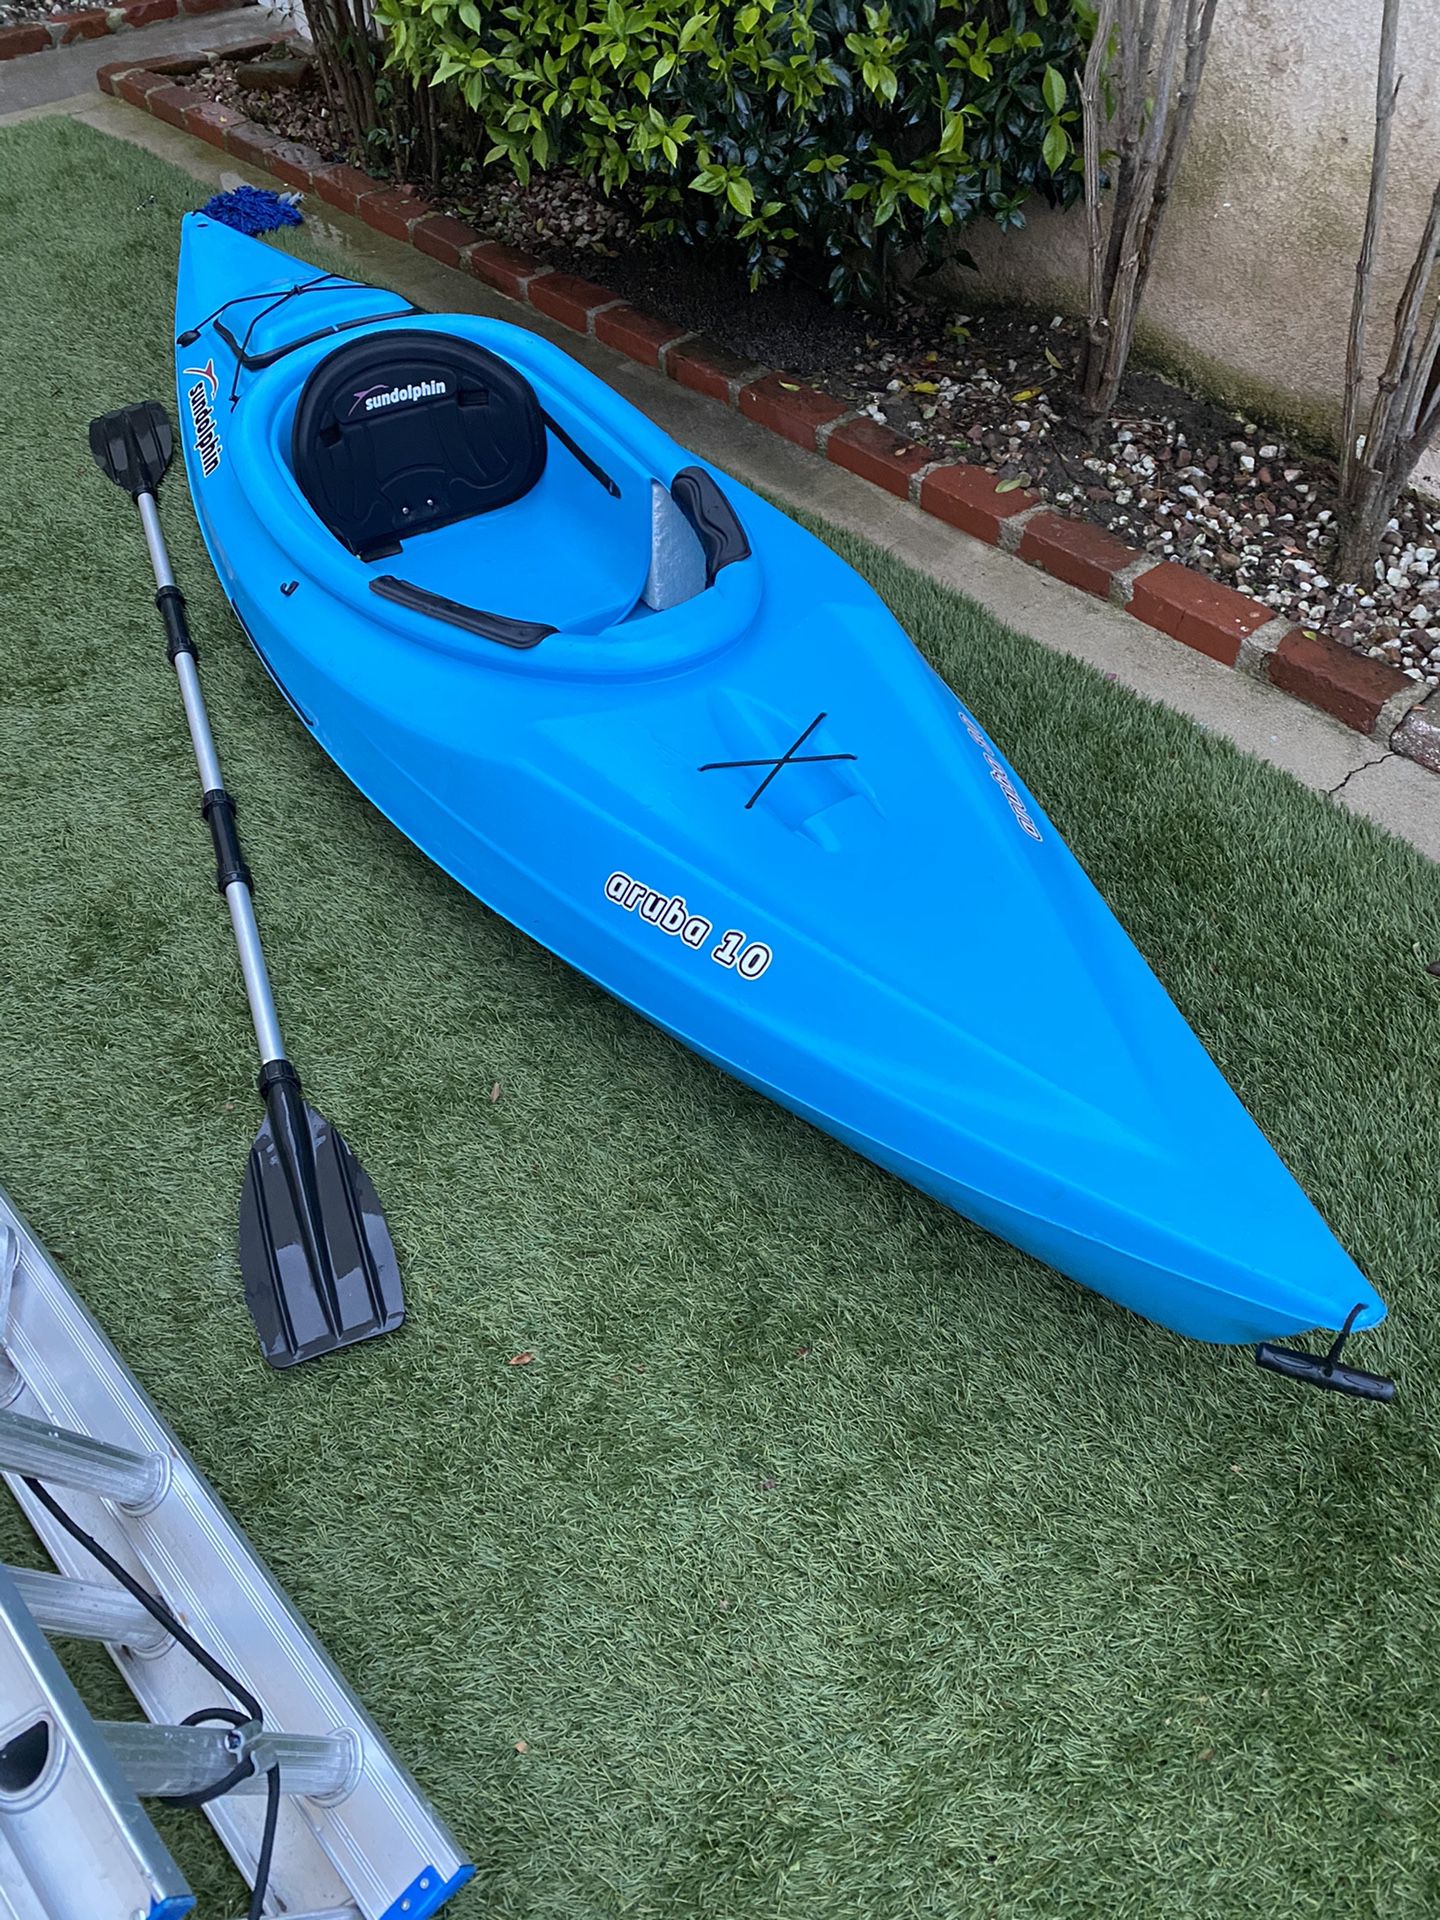 Kayaks for sale 2 total for Sale in Seal Beach, CA - OfferUp